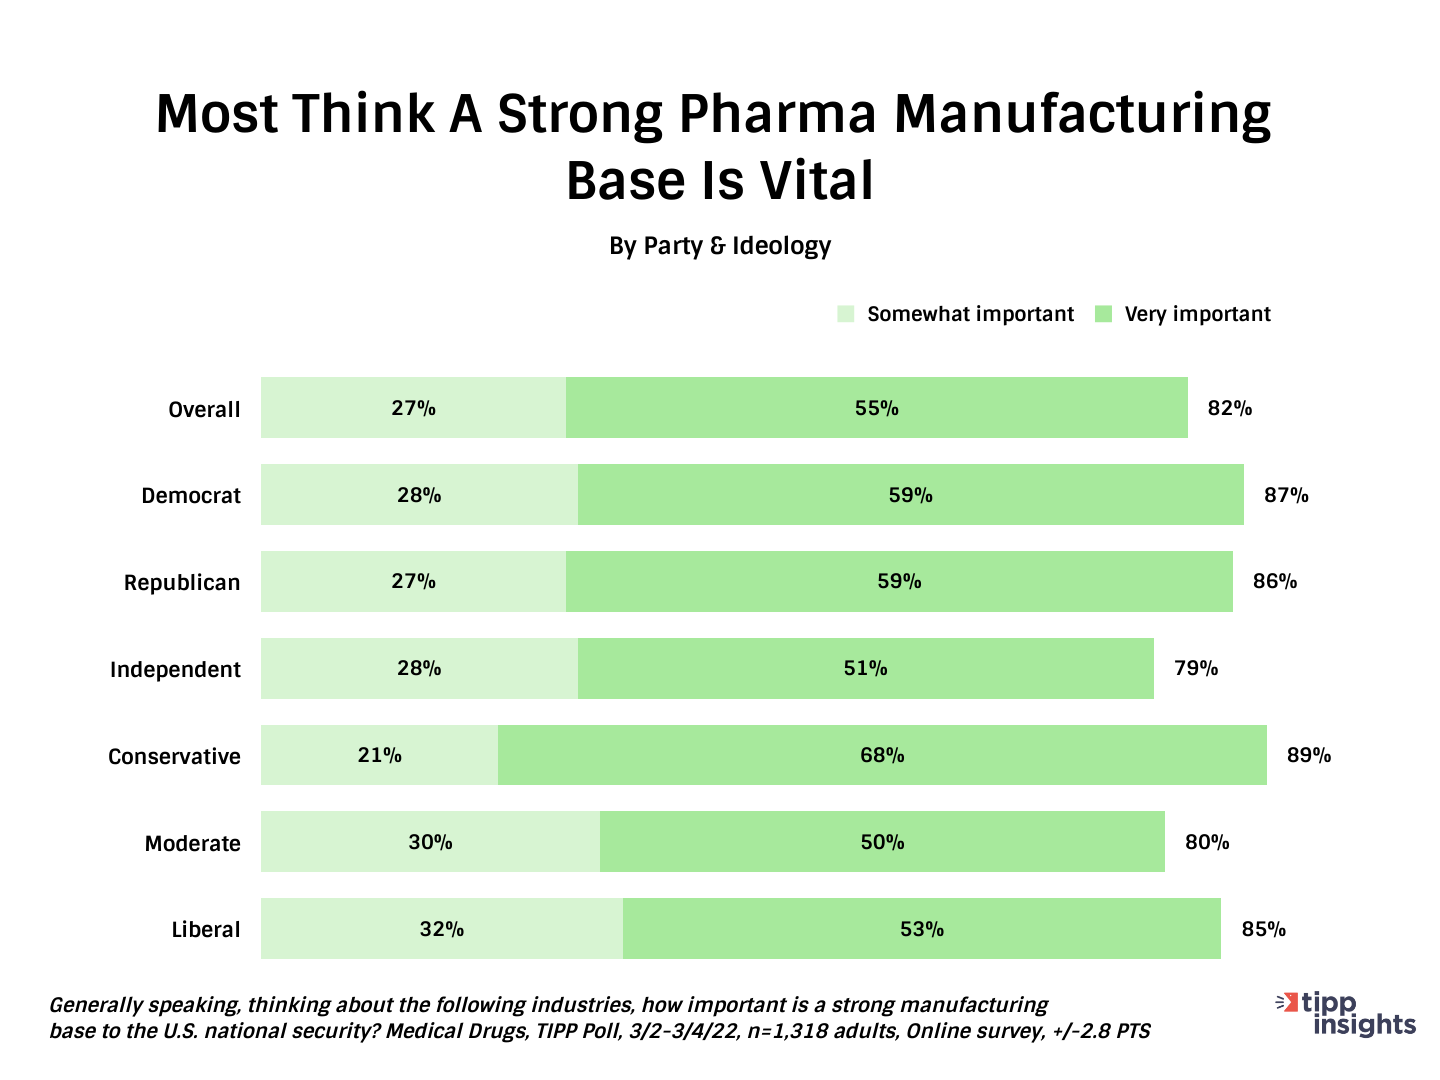 TIPP Poll Results: Most think a strong pharma manufacturing base is vital